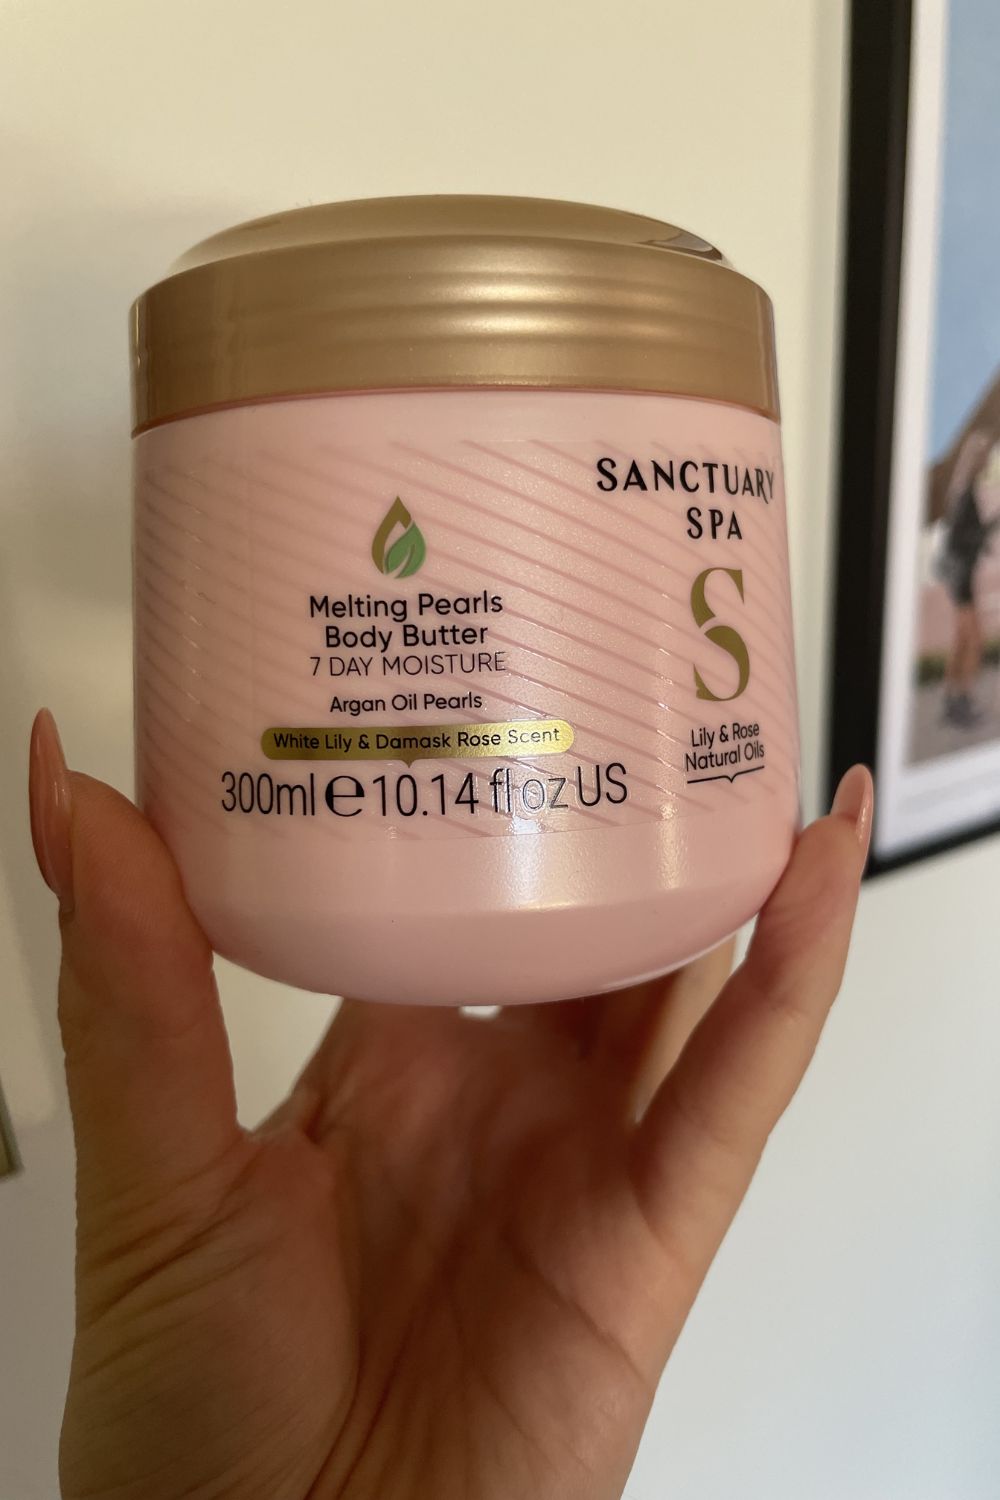 valeza holding the Sanctuary Spa Melting Pearls Body Butter